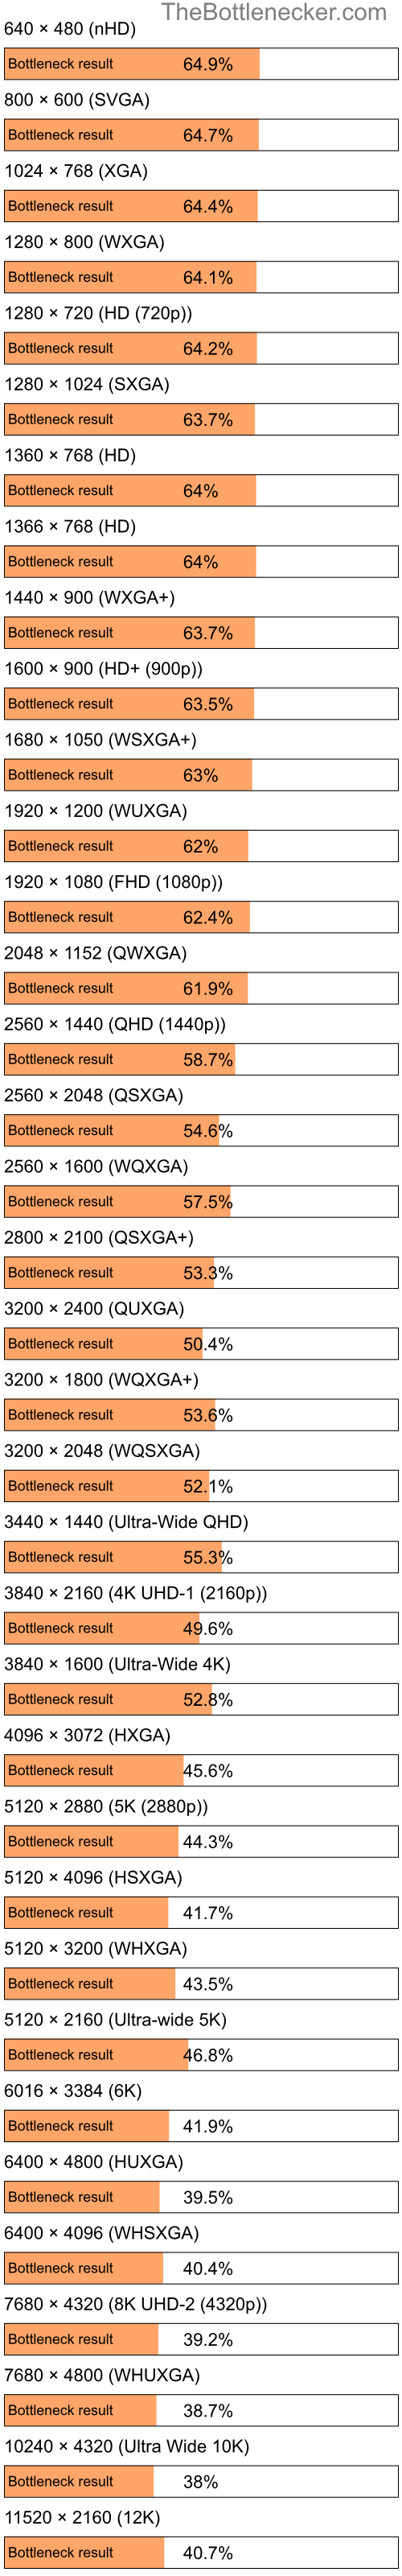 Bottleneck results by resolution for Intel Core i5-3470 and NVIDIA GeForce RTX 3080 in General Tasks